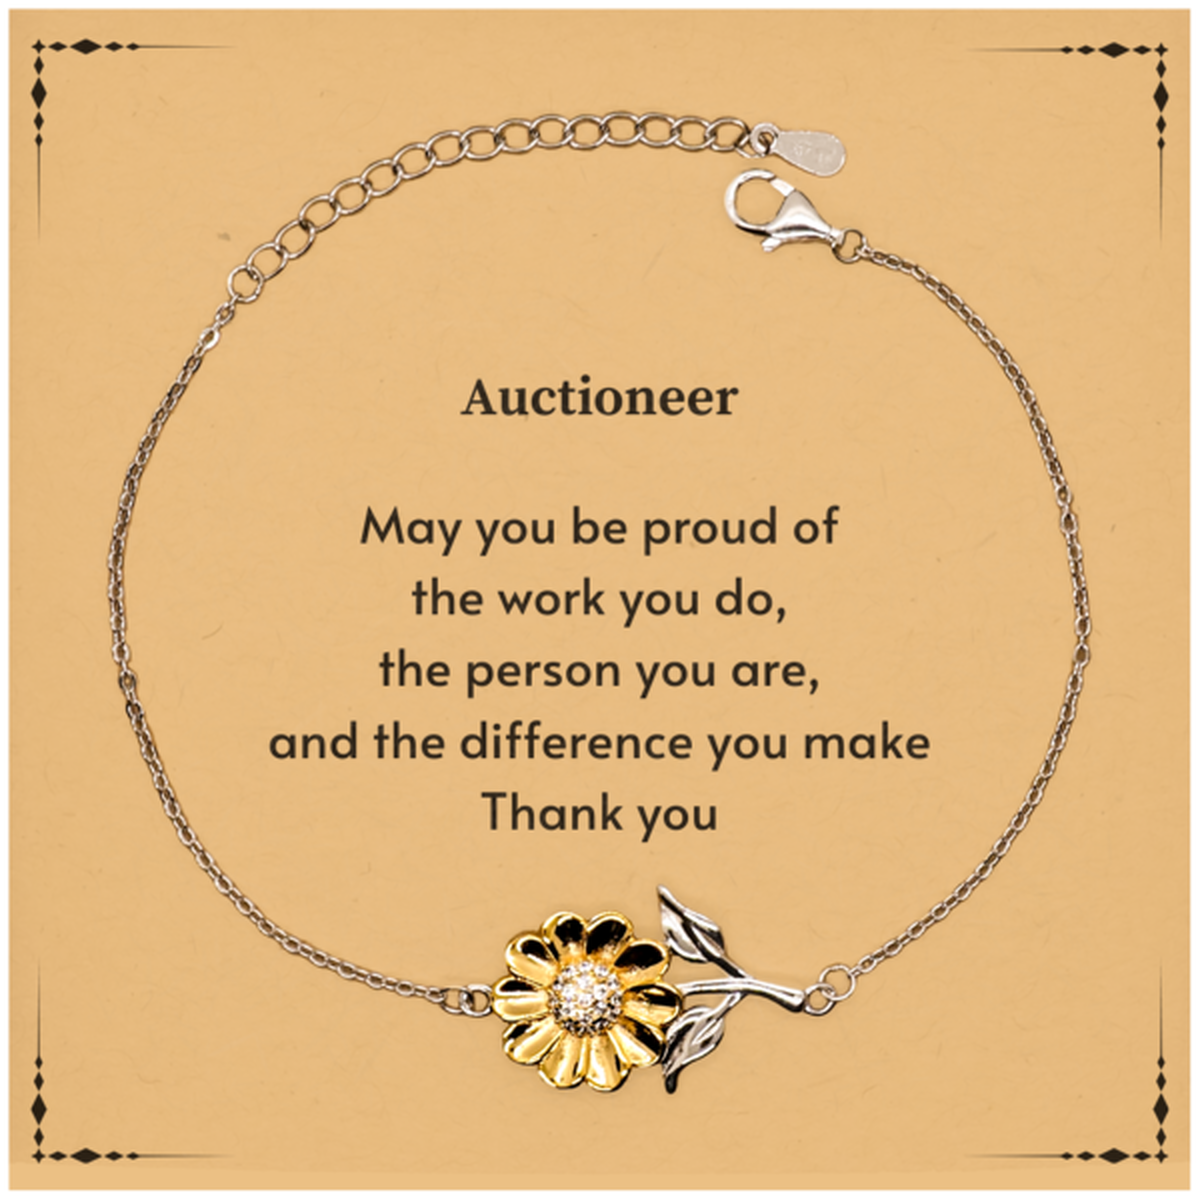 Heartwarming Sunflower Bracelet Retirement Coworkers Gifts for Auctioneer, Auctioneer May You be proud of the work you do, the person you are Gifts for Boss Men Women Friends